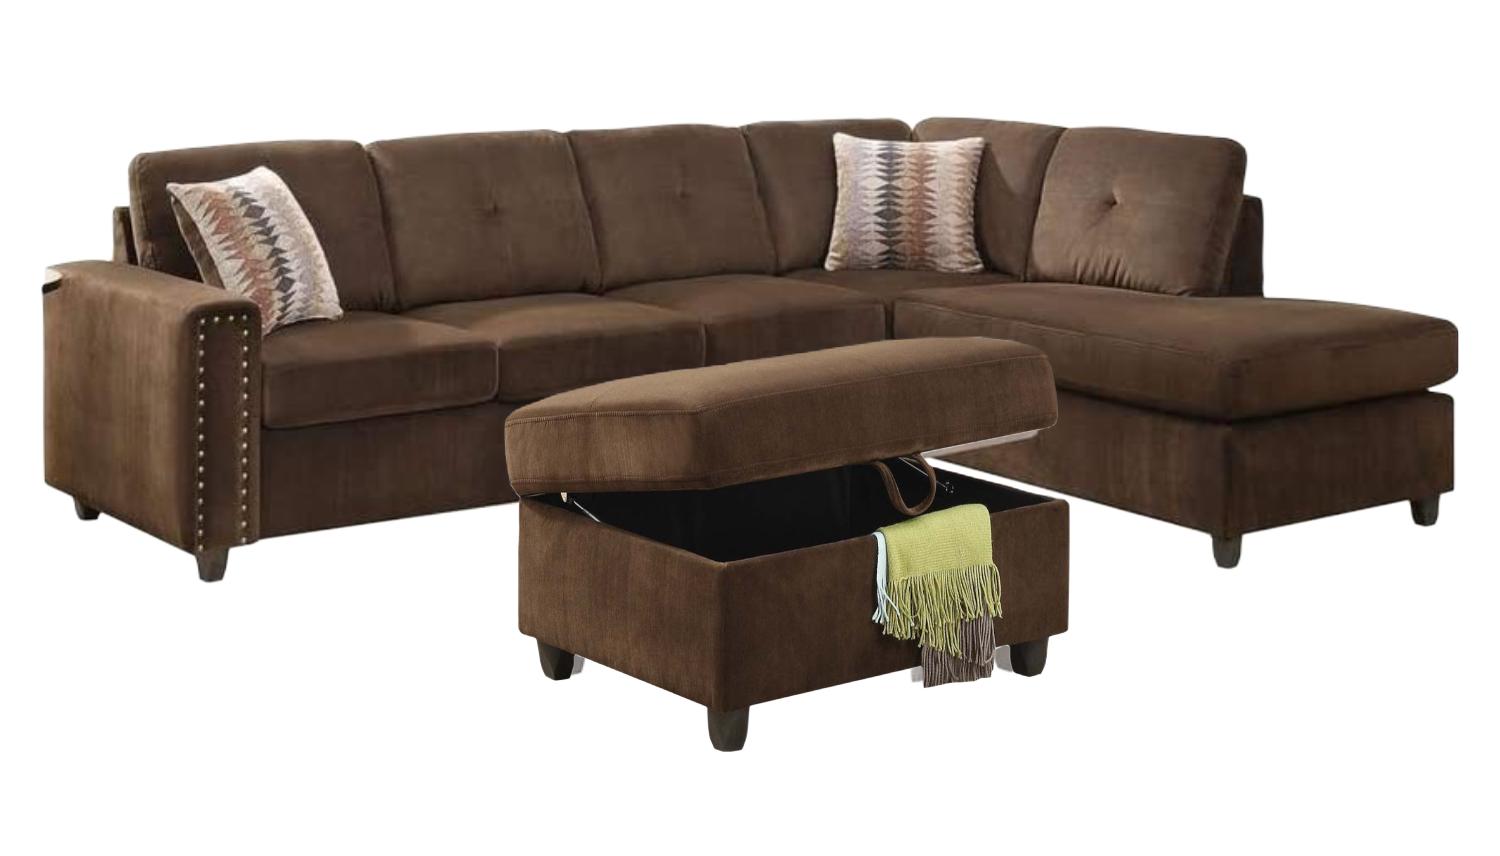 Acme Furniture Belville Sectional w/ Ottoman